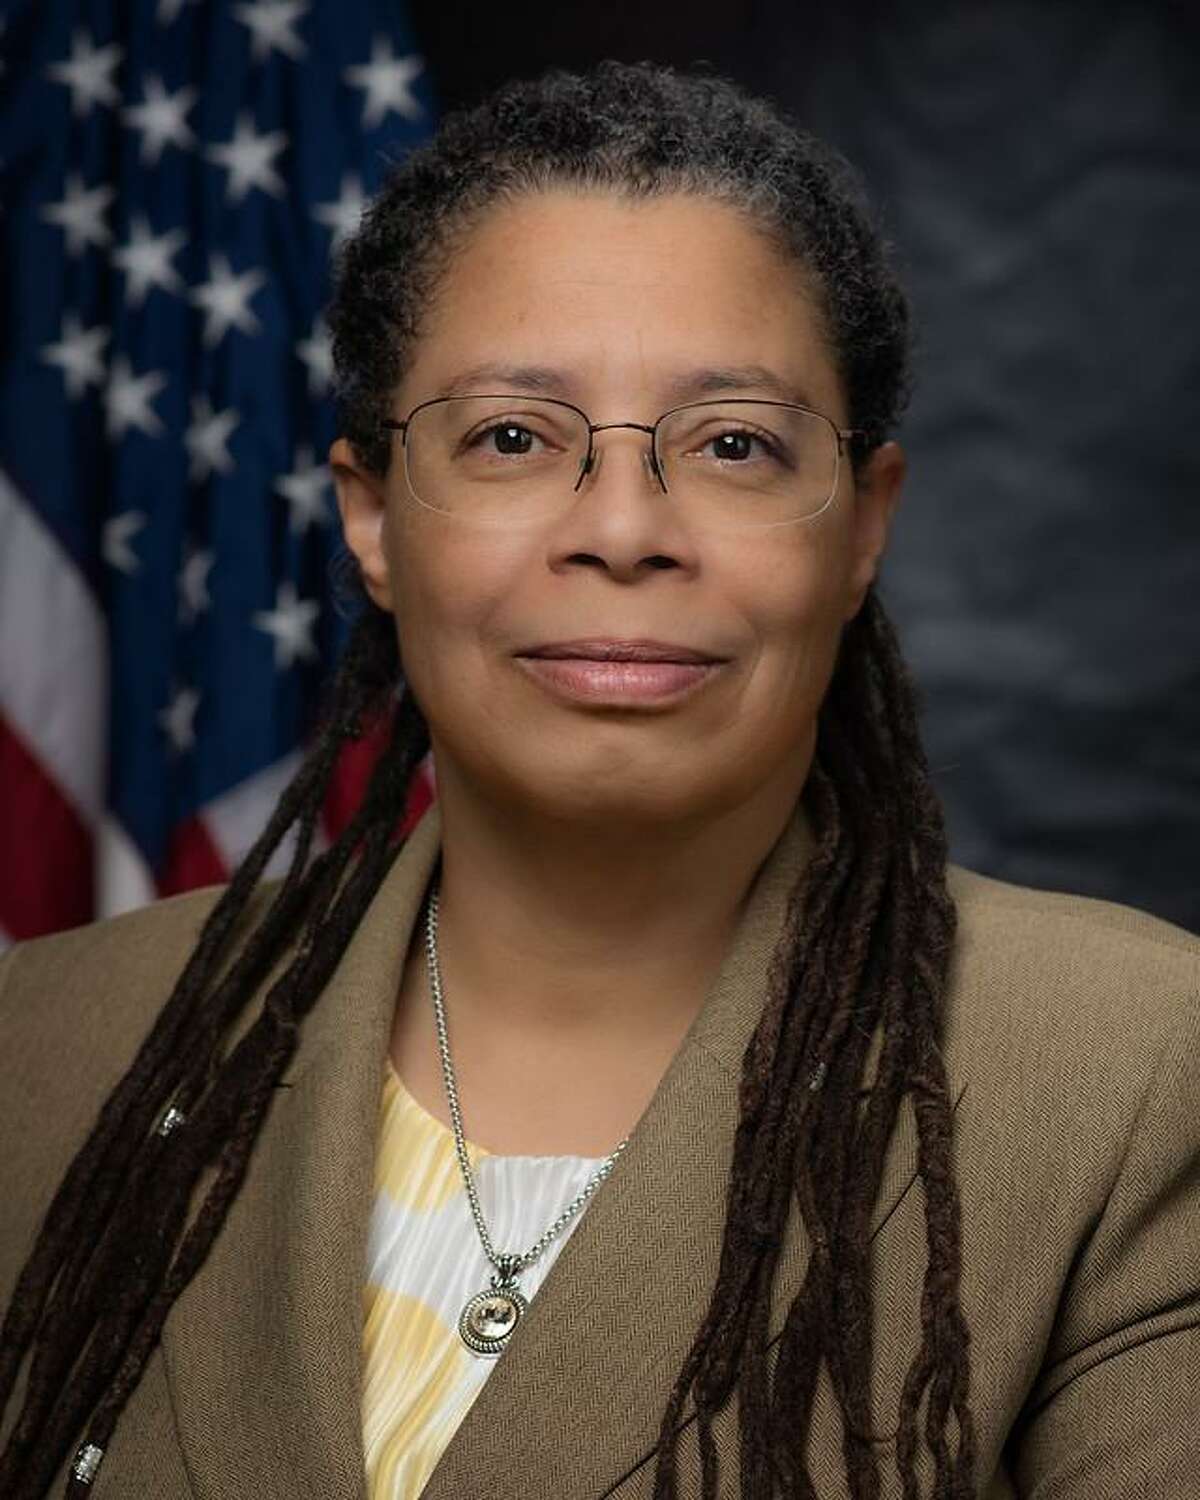 Earthea Nance serves as a regional administrator for the Environmental Protection Agency.